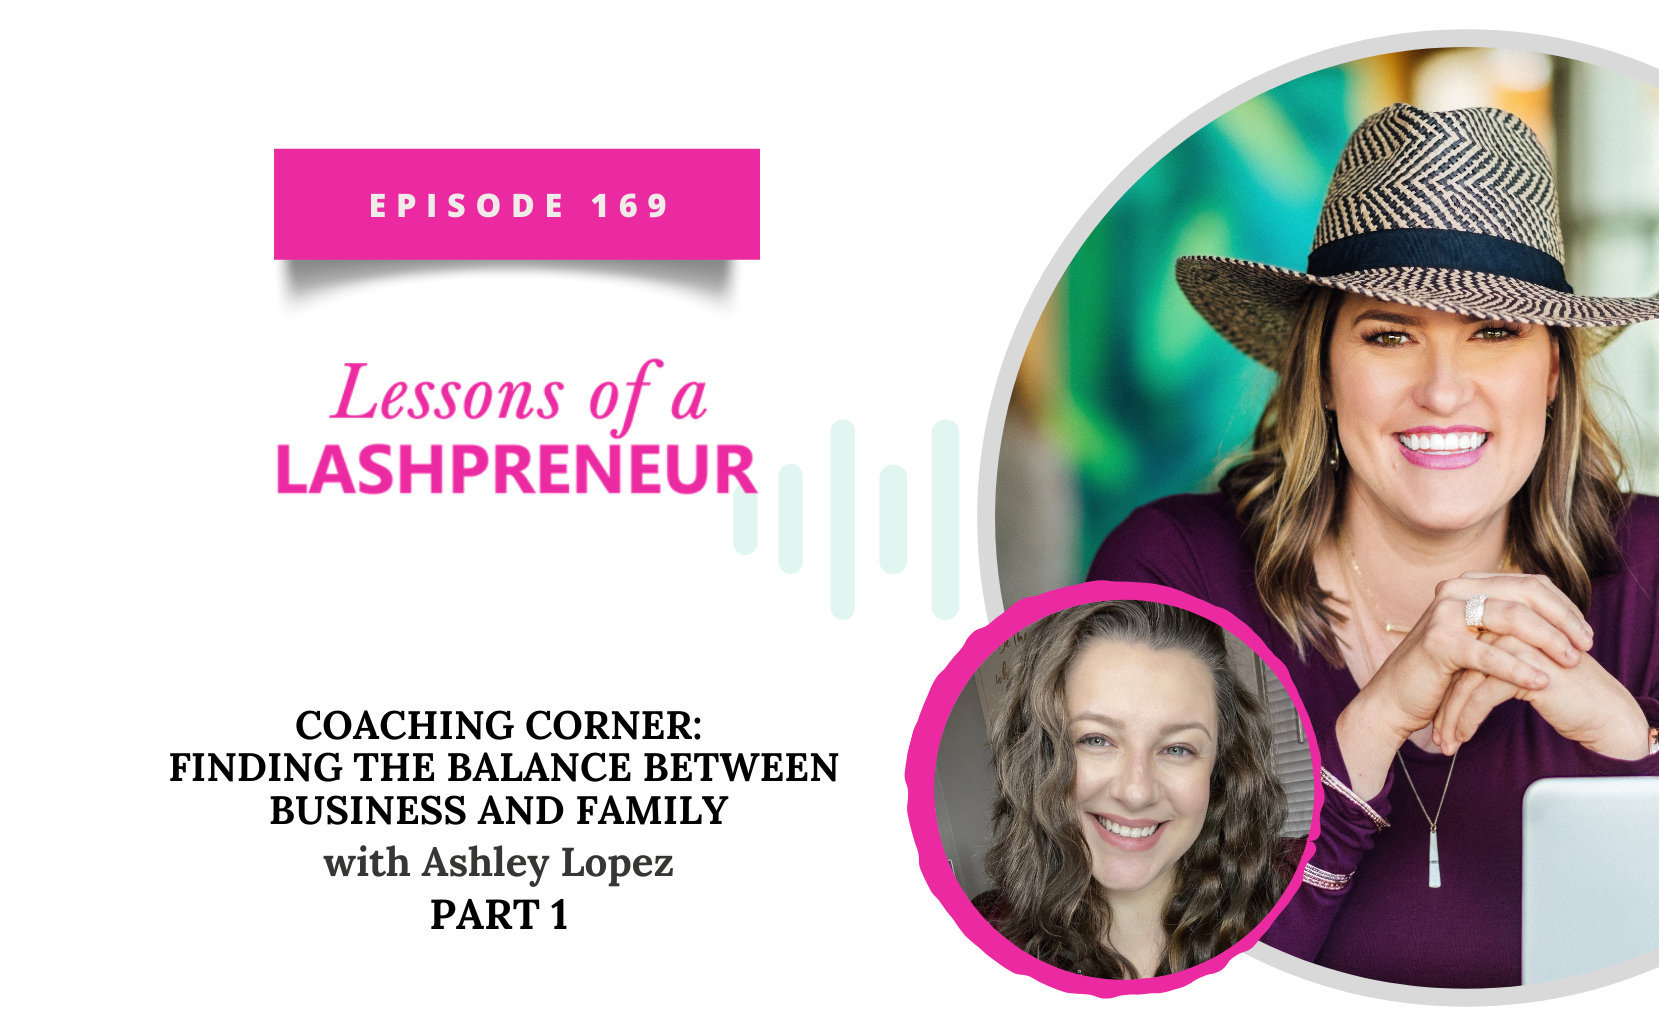 Coaching Corner: Finding the Balance Between Business and Family with Ashley Lopez Part 1